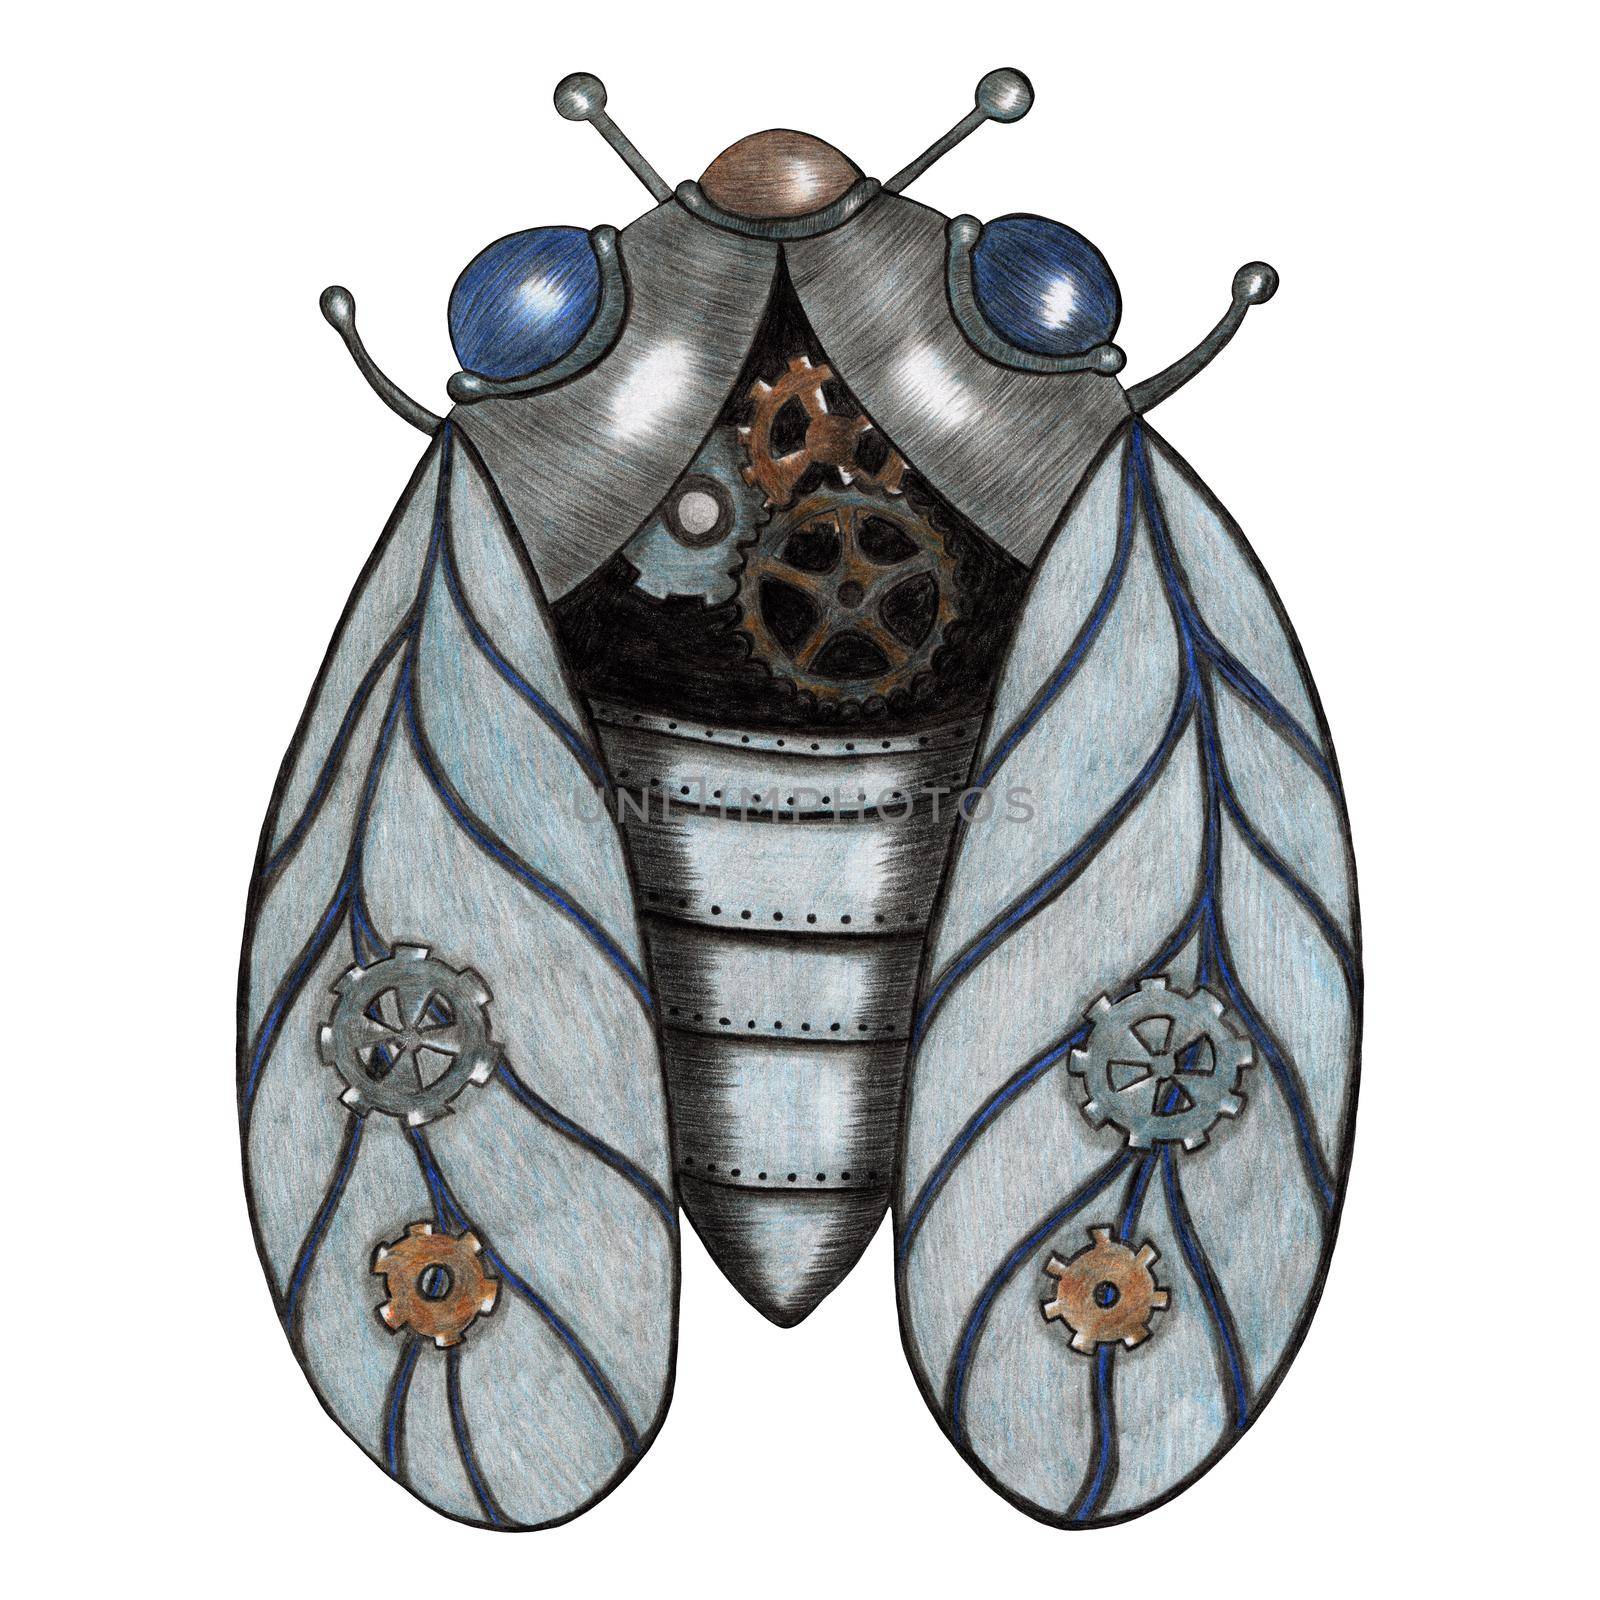 Design Element Hand Drawn Illustration of Colorful Steampunk Cicada in Gray Colors Isolated on White Background. Steampunk Cicada Drawn by Color Pencils.